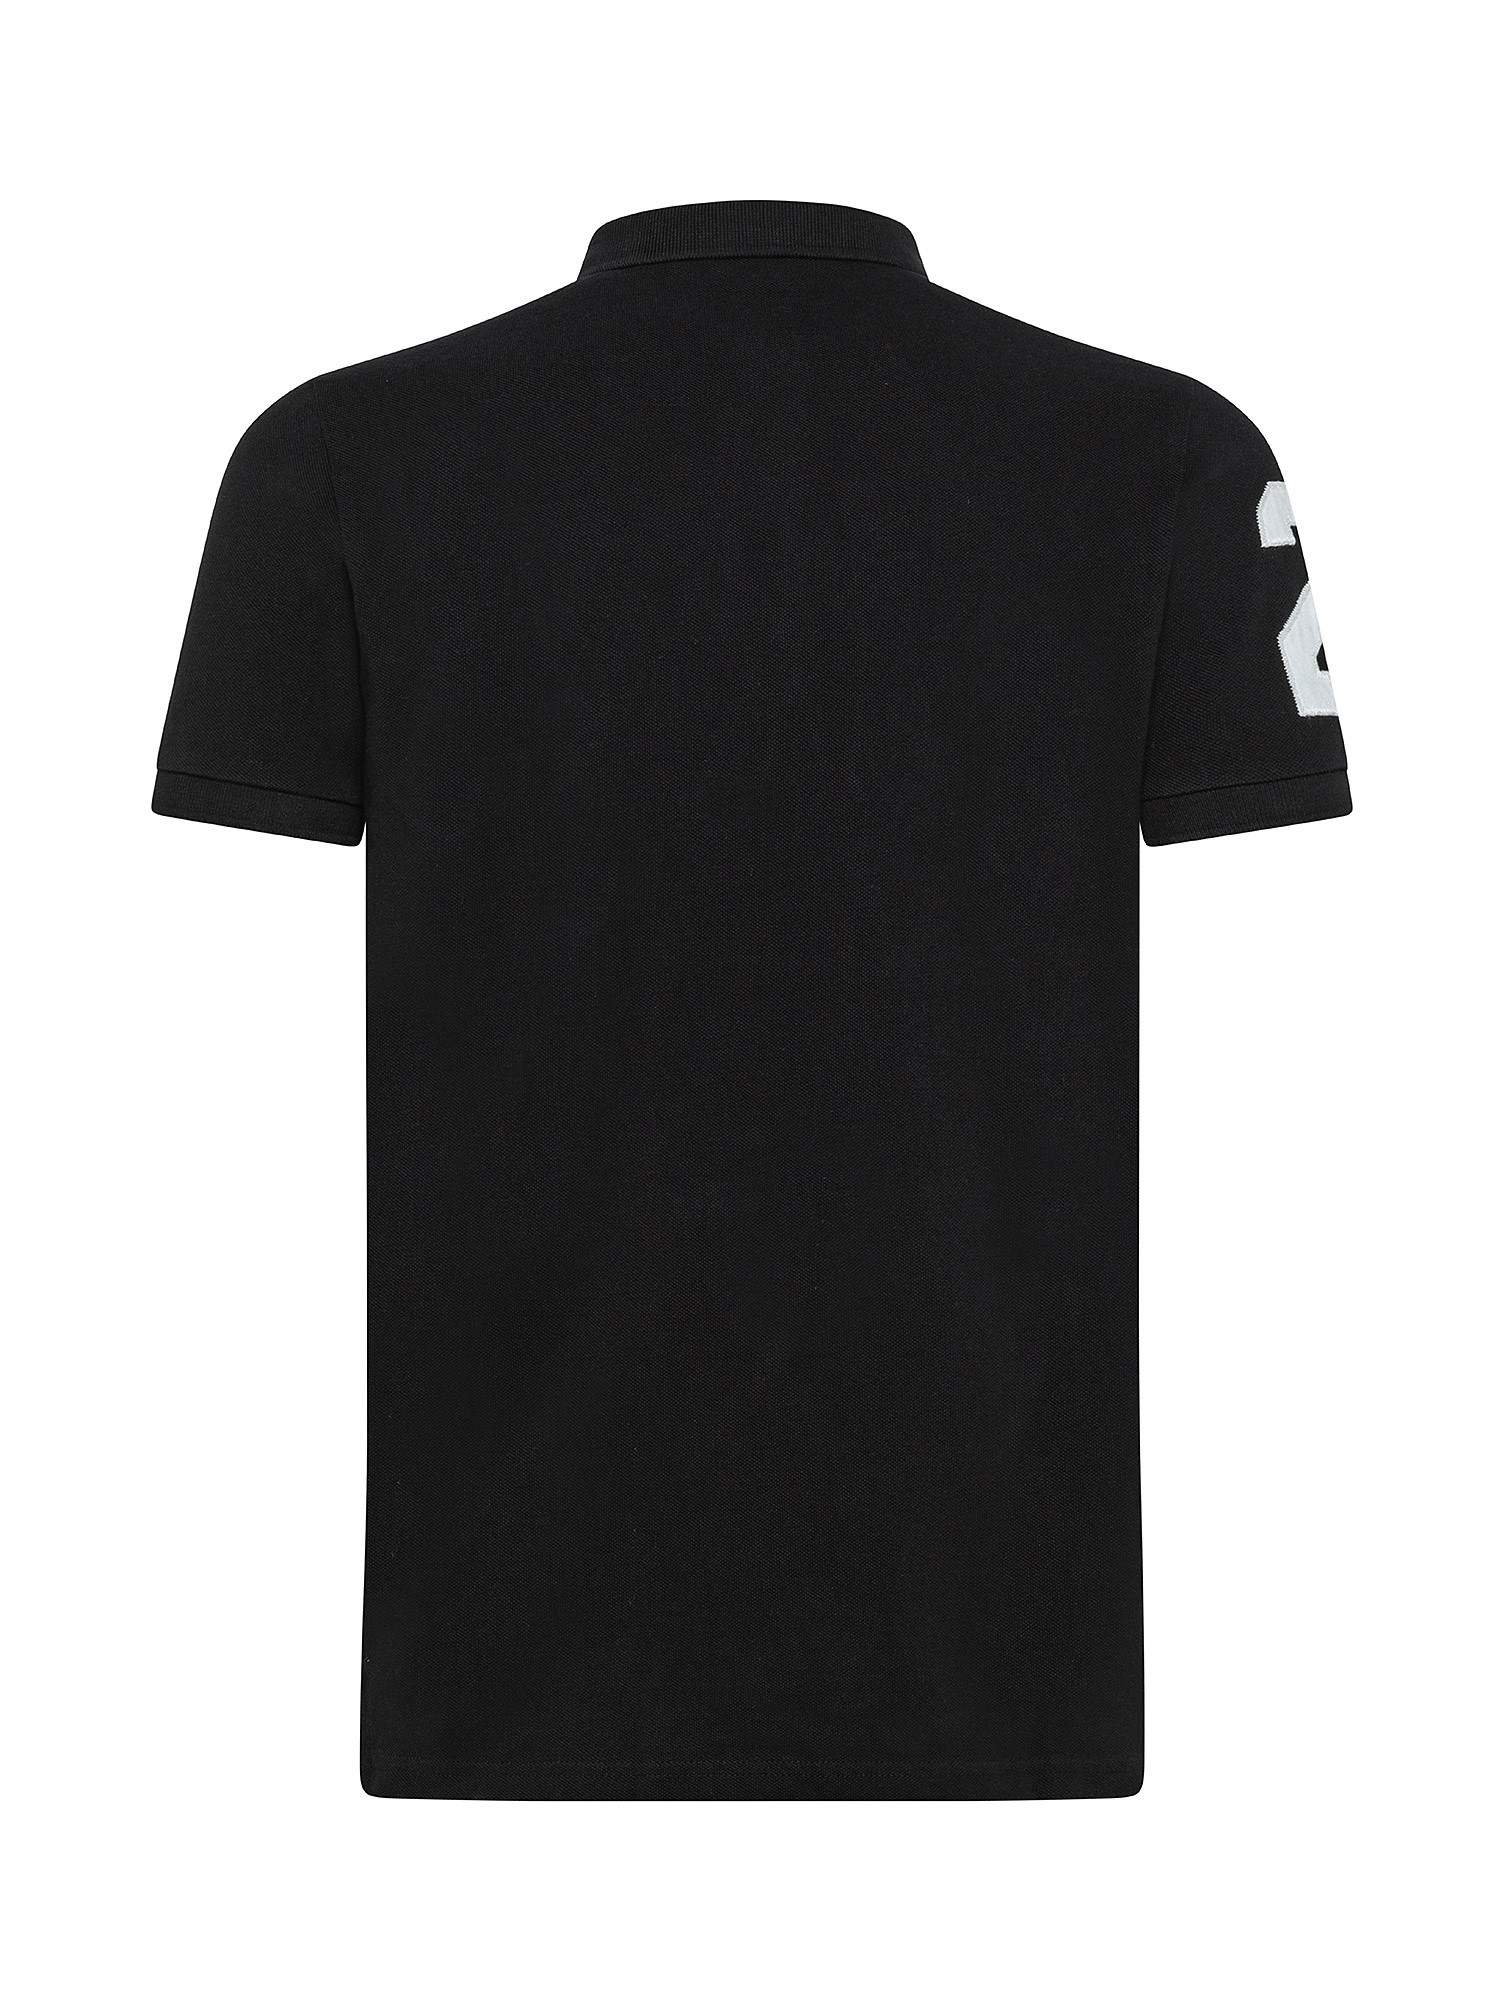 Polo shirt with embroidered graphics, Black, large image number 1